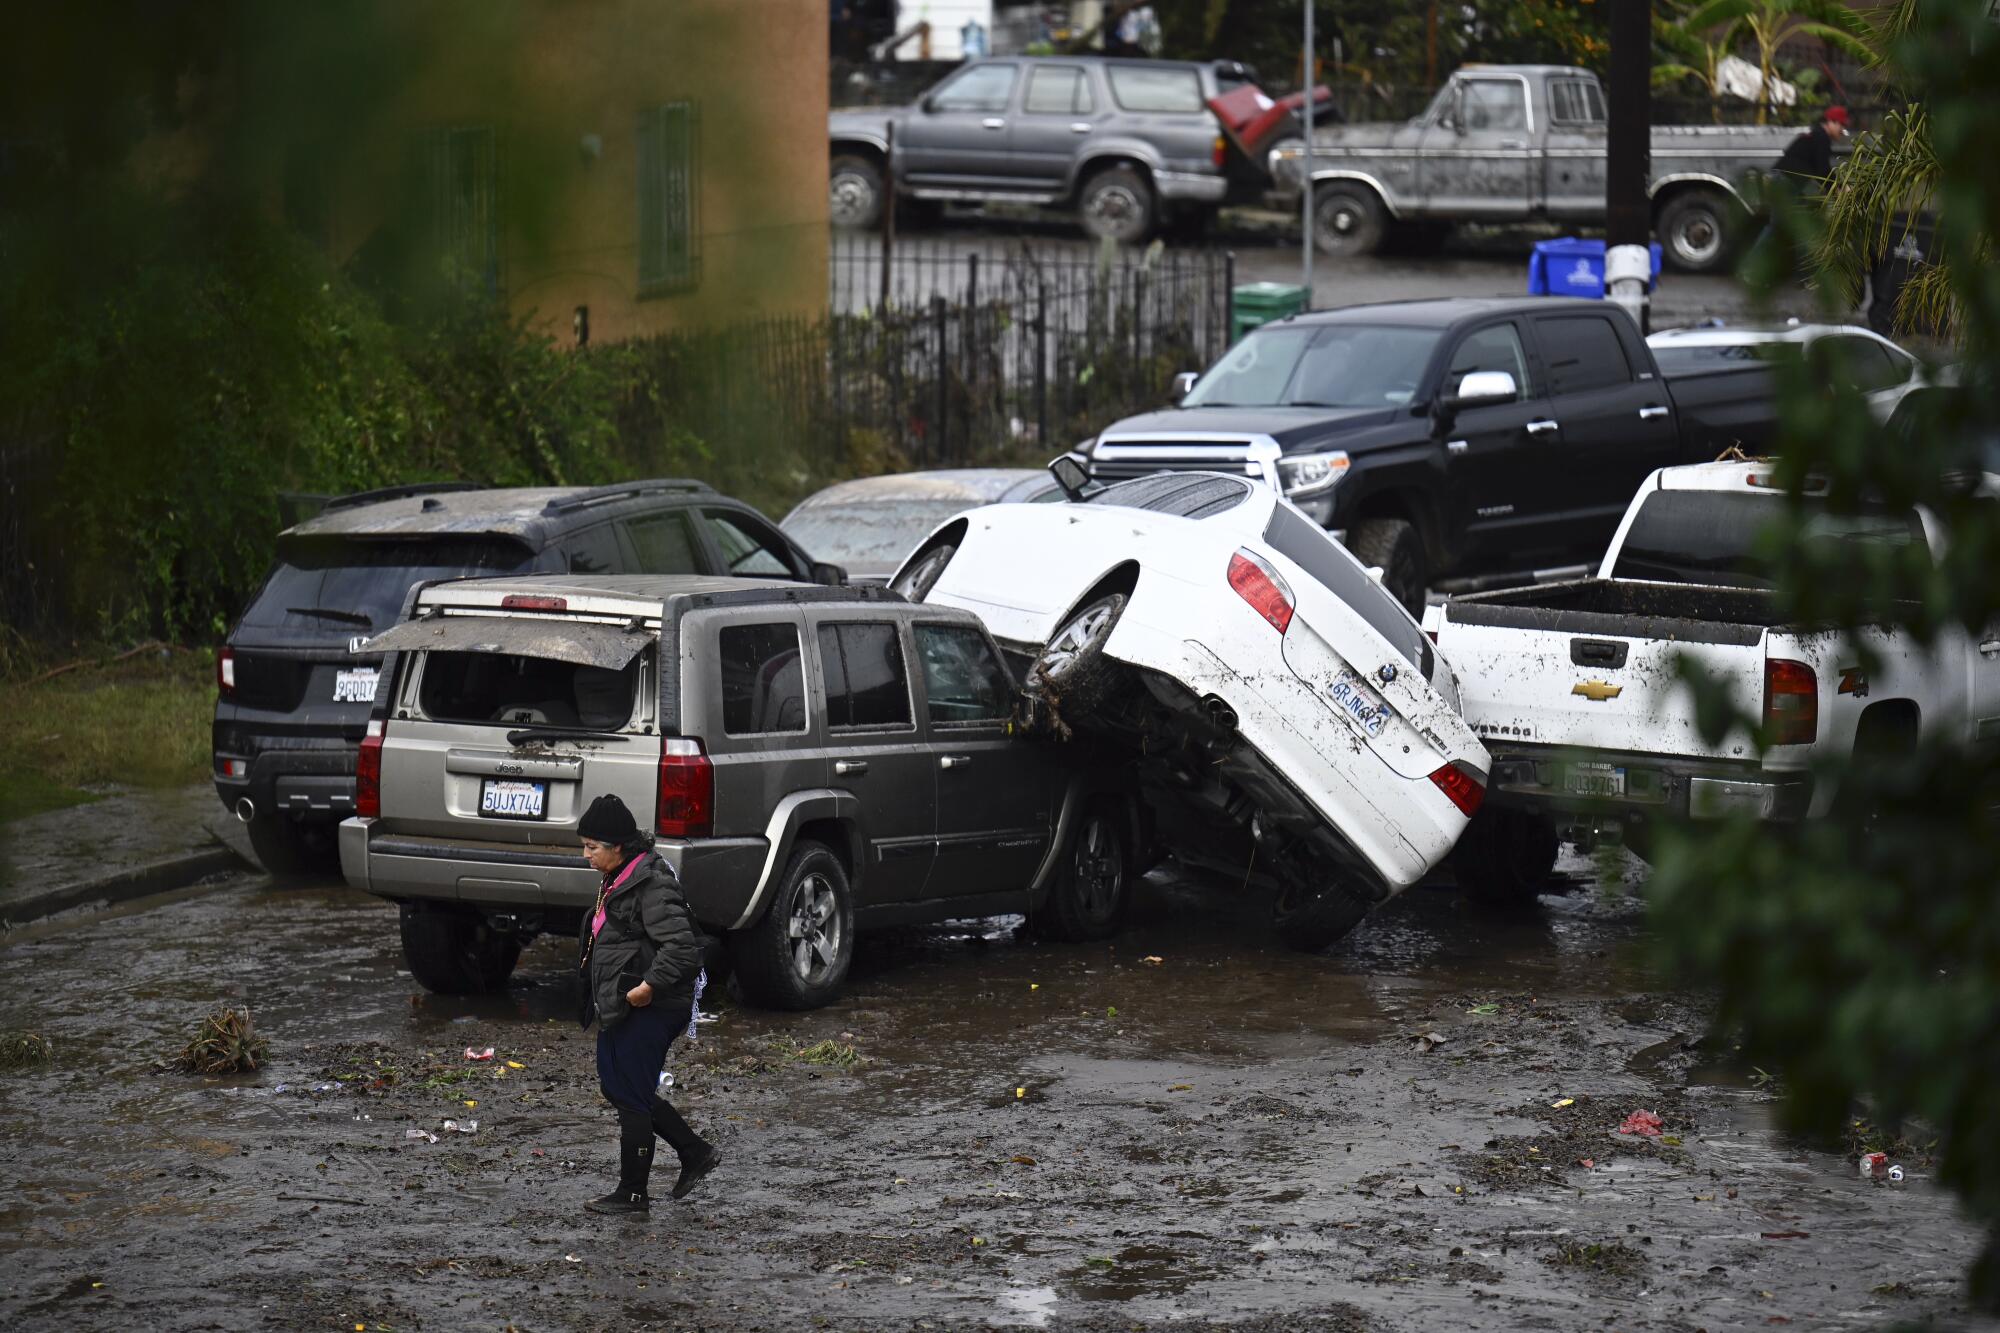 A woman walks by cars damaged by floods during a rainstorm in San Diego.